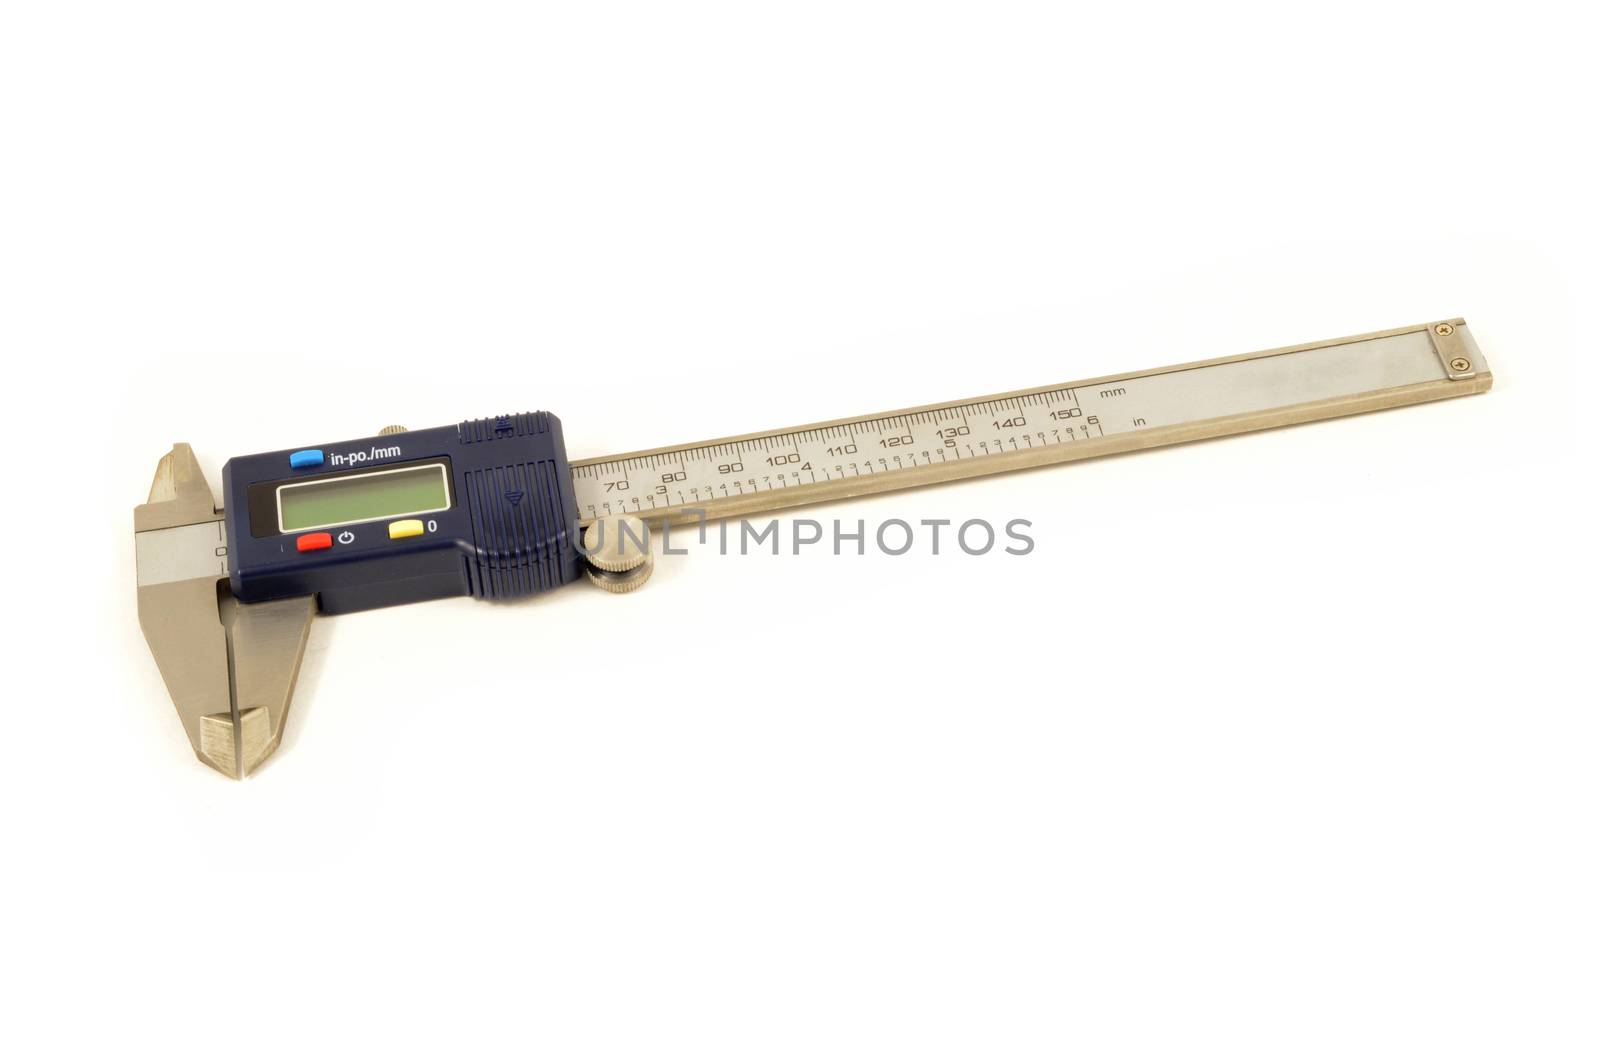 An isolated over a white background image of a digital caliper tool.